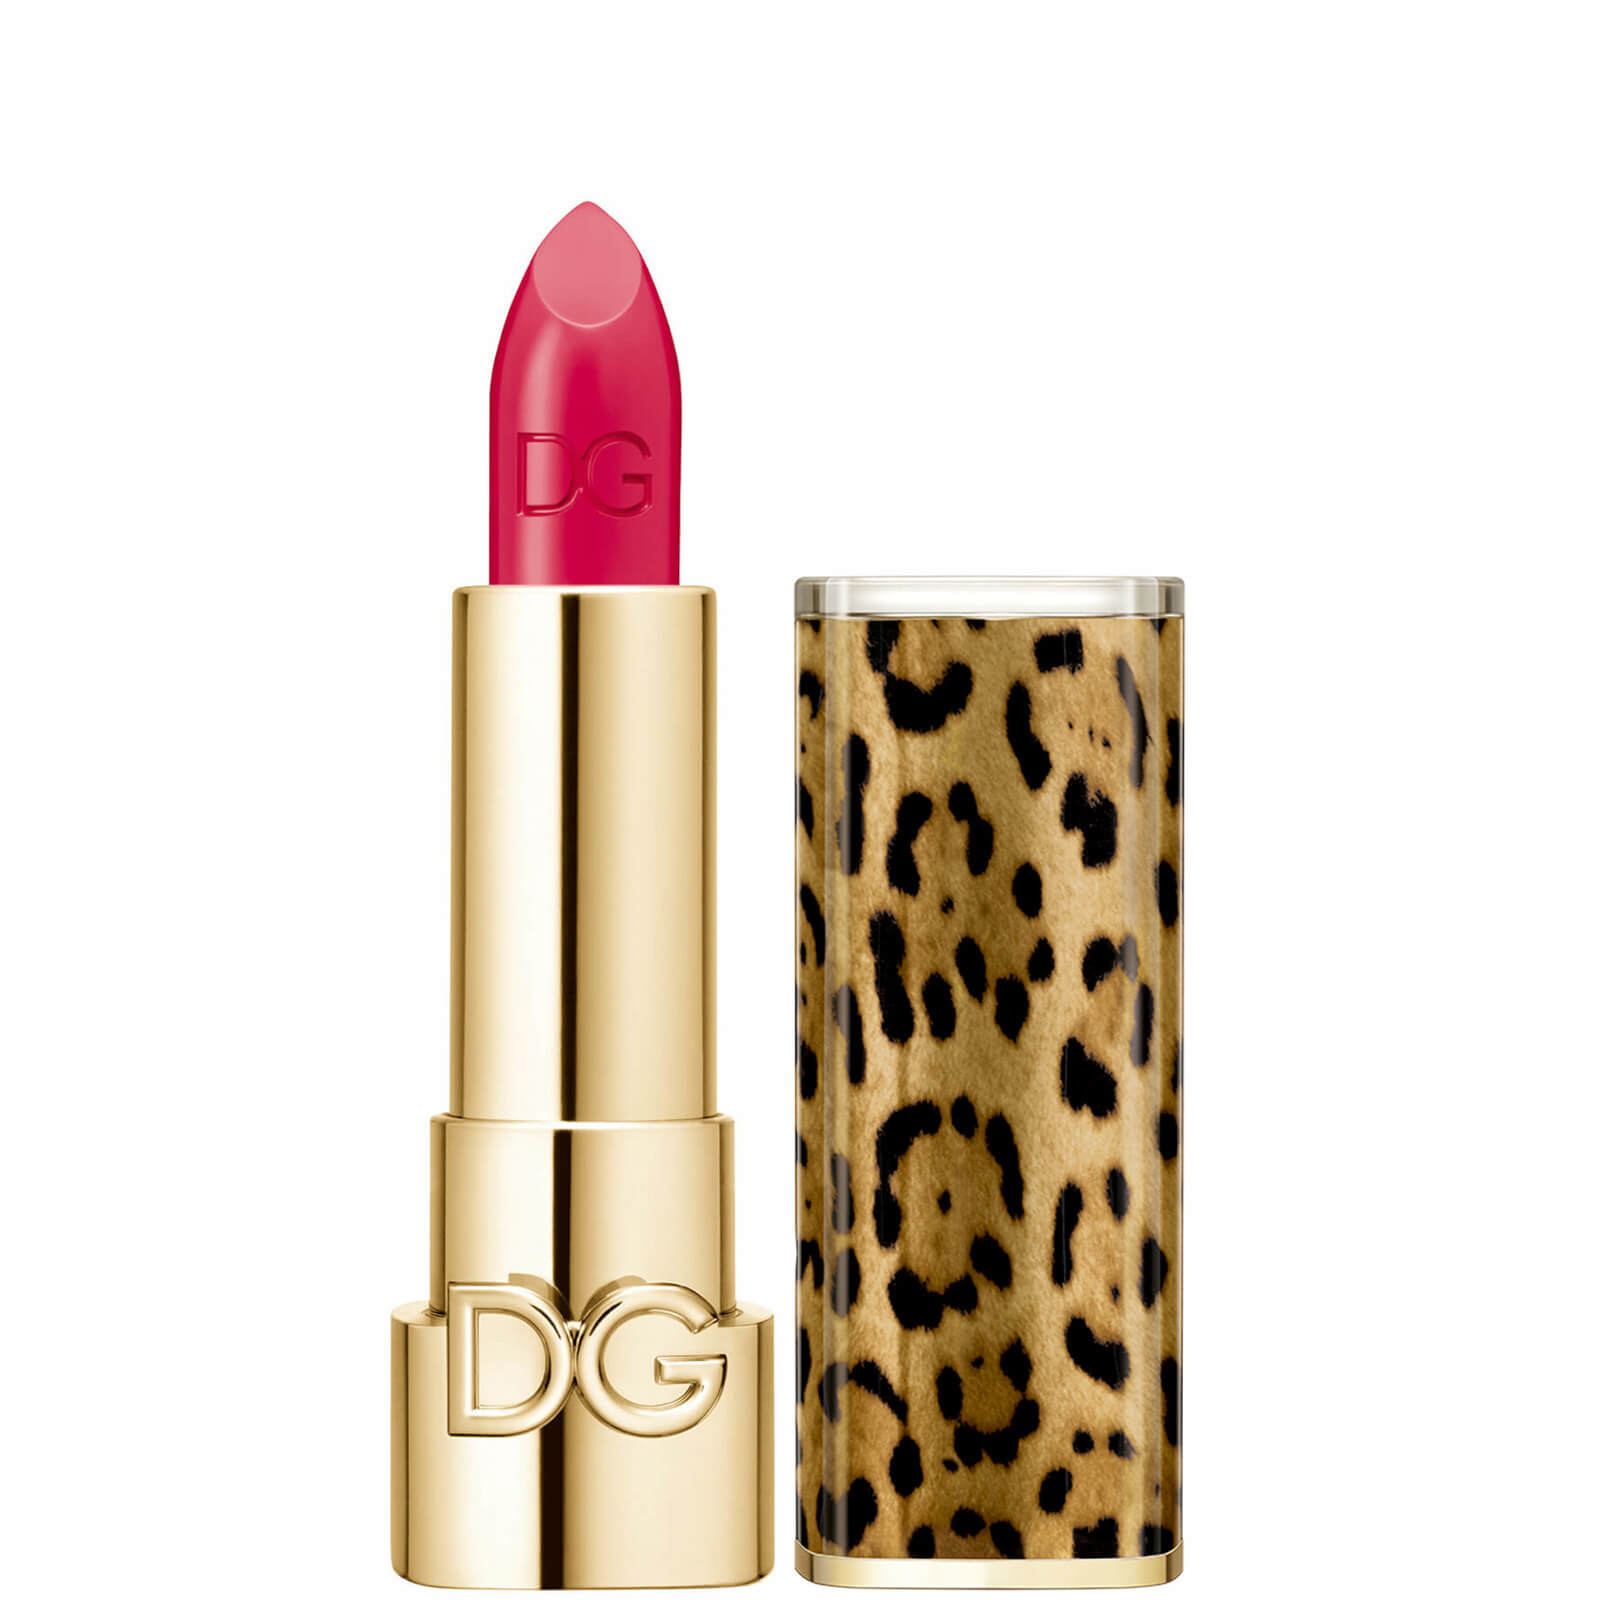 Dolce&Gabbana The Only One Lipstick + Cap (Animalier) (Various Shades) - 250 Gummy Berry